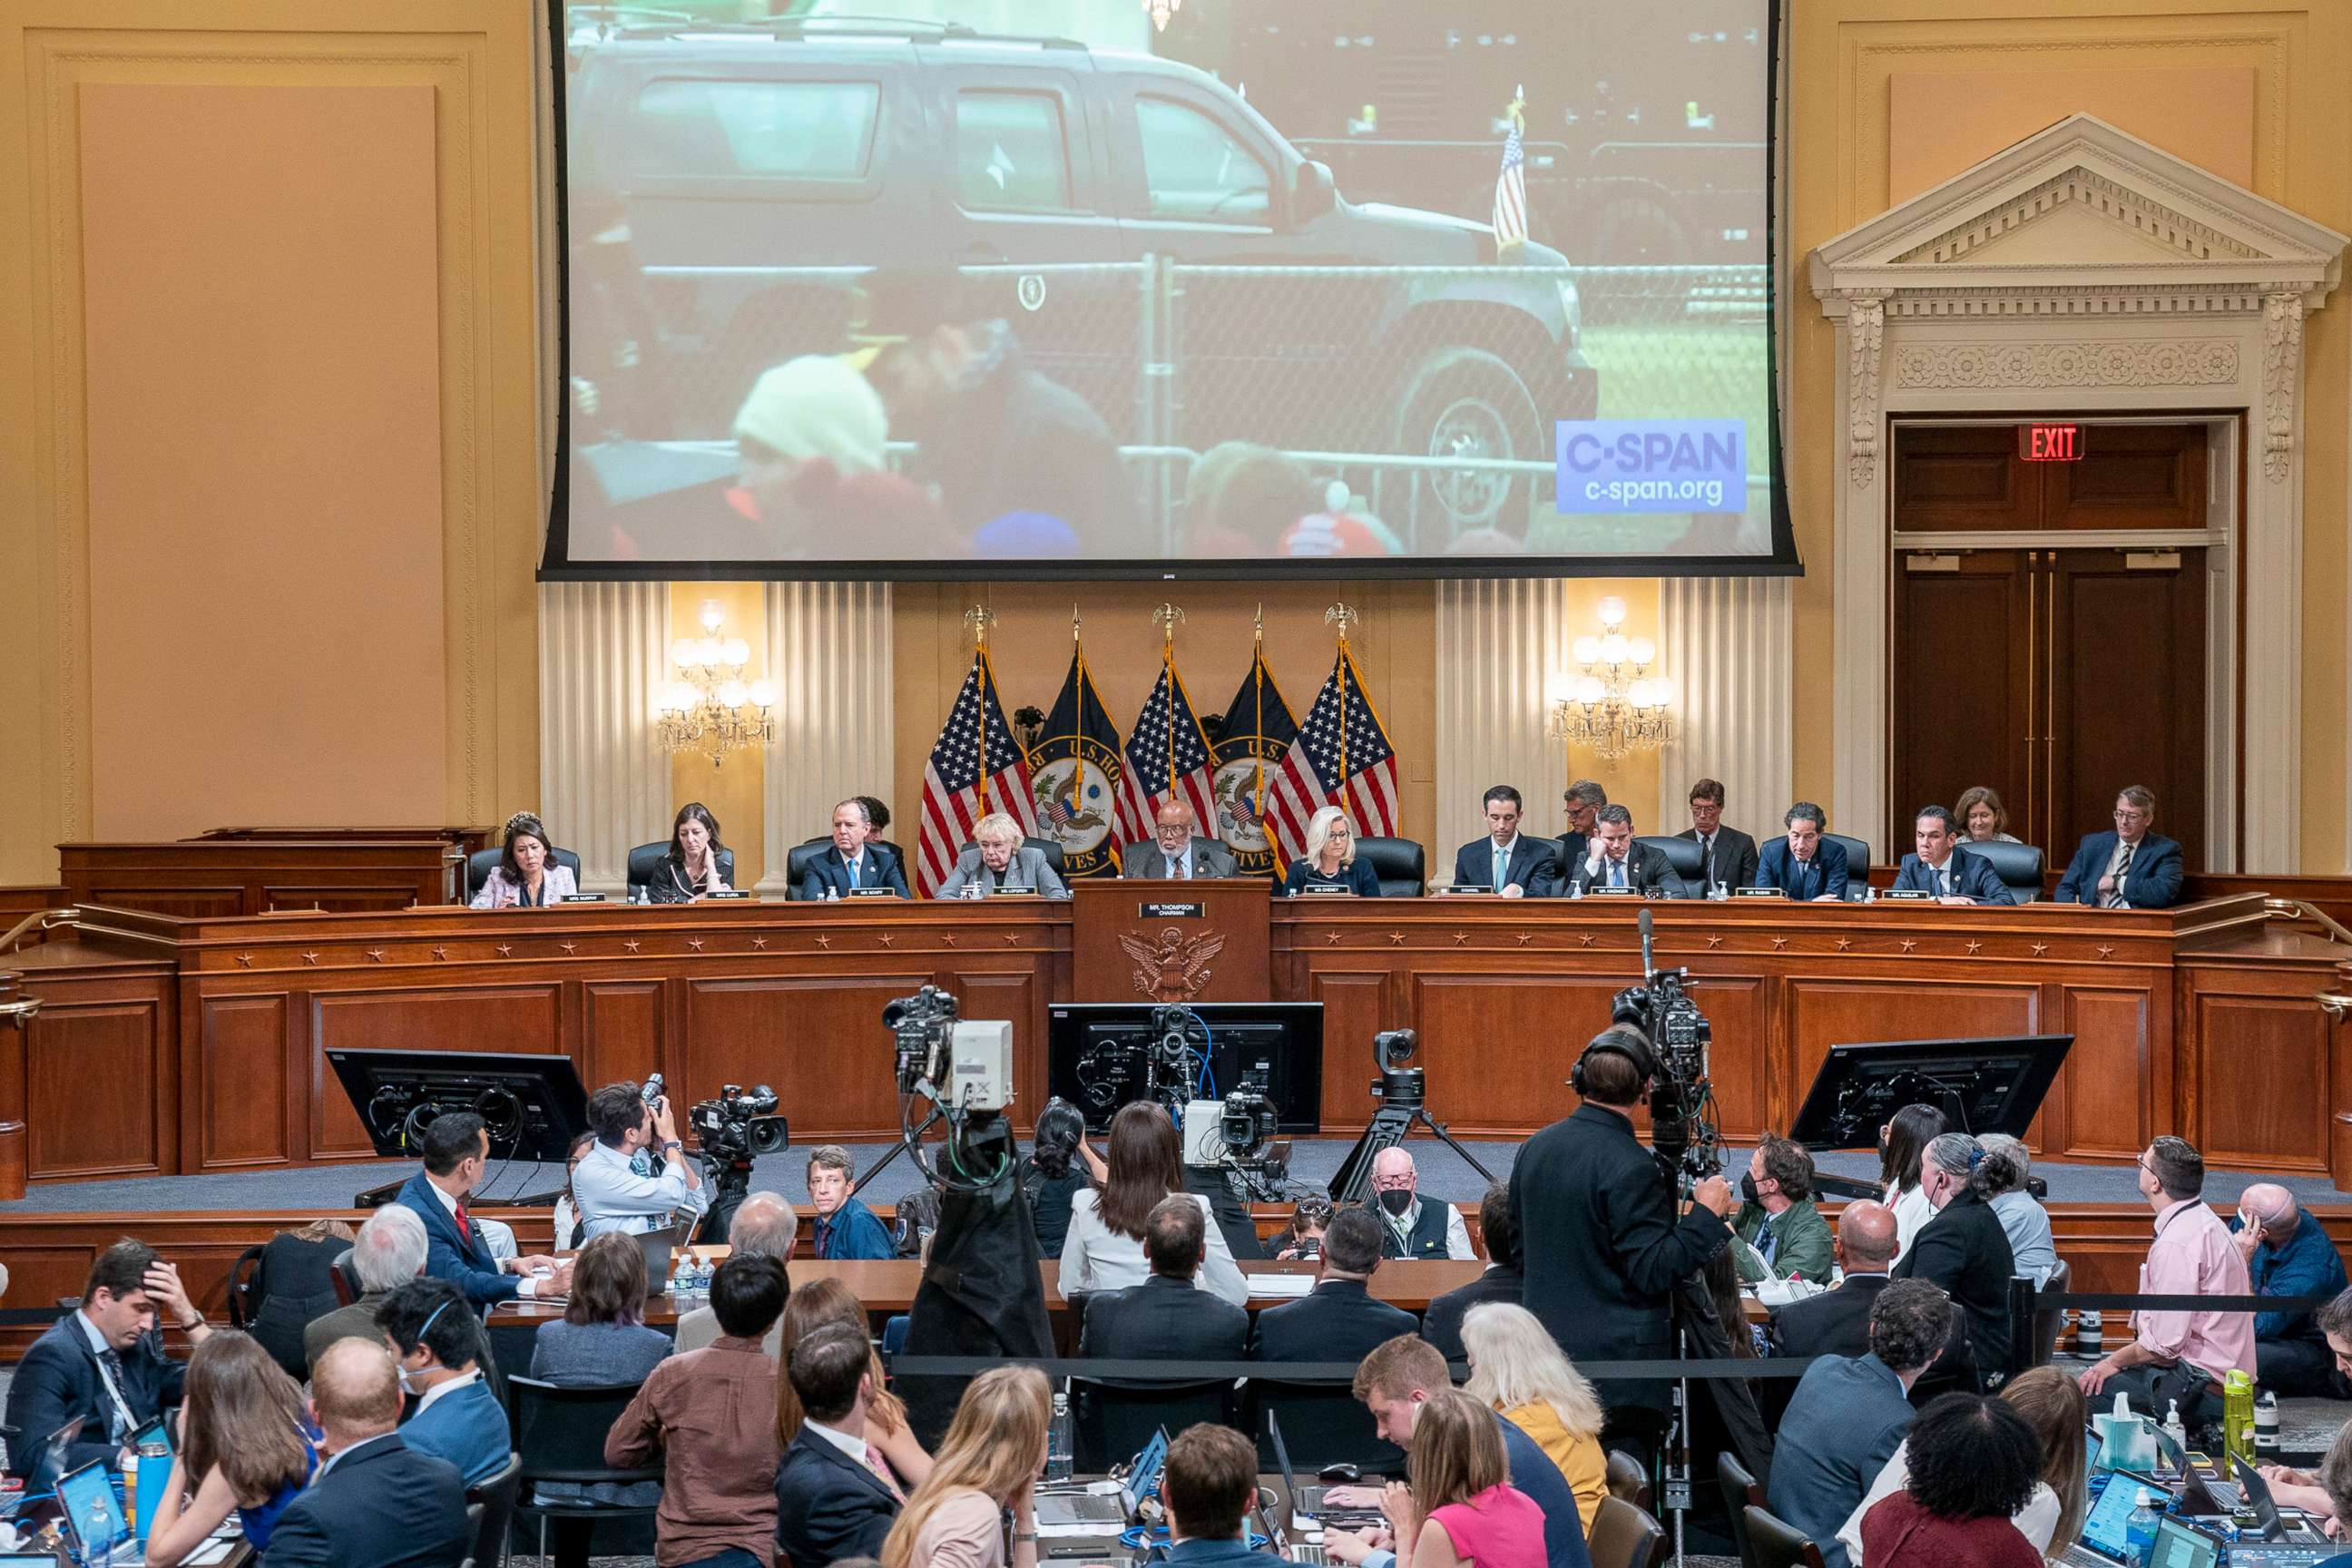 PHOTO: A video of former President Trump's motorcade leaving the January 6th rally on the Ellipse is displayed during the sixth hearing held by the Select Committee to Investigate the January 6th Attack on the U.S. Capitol in Washington, June 28, 2022.